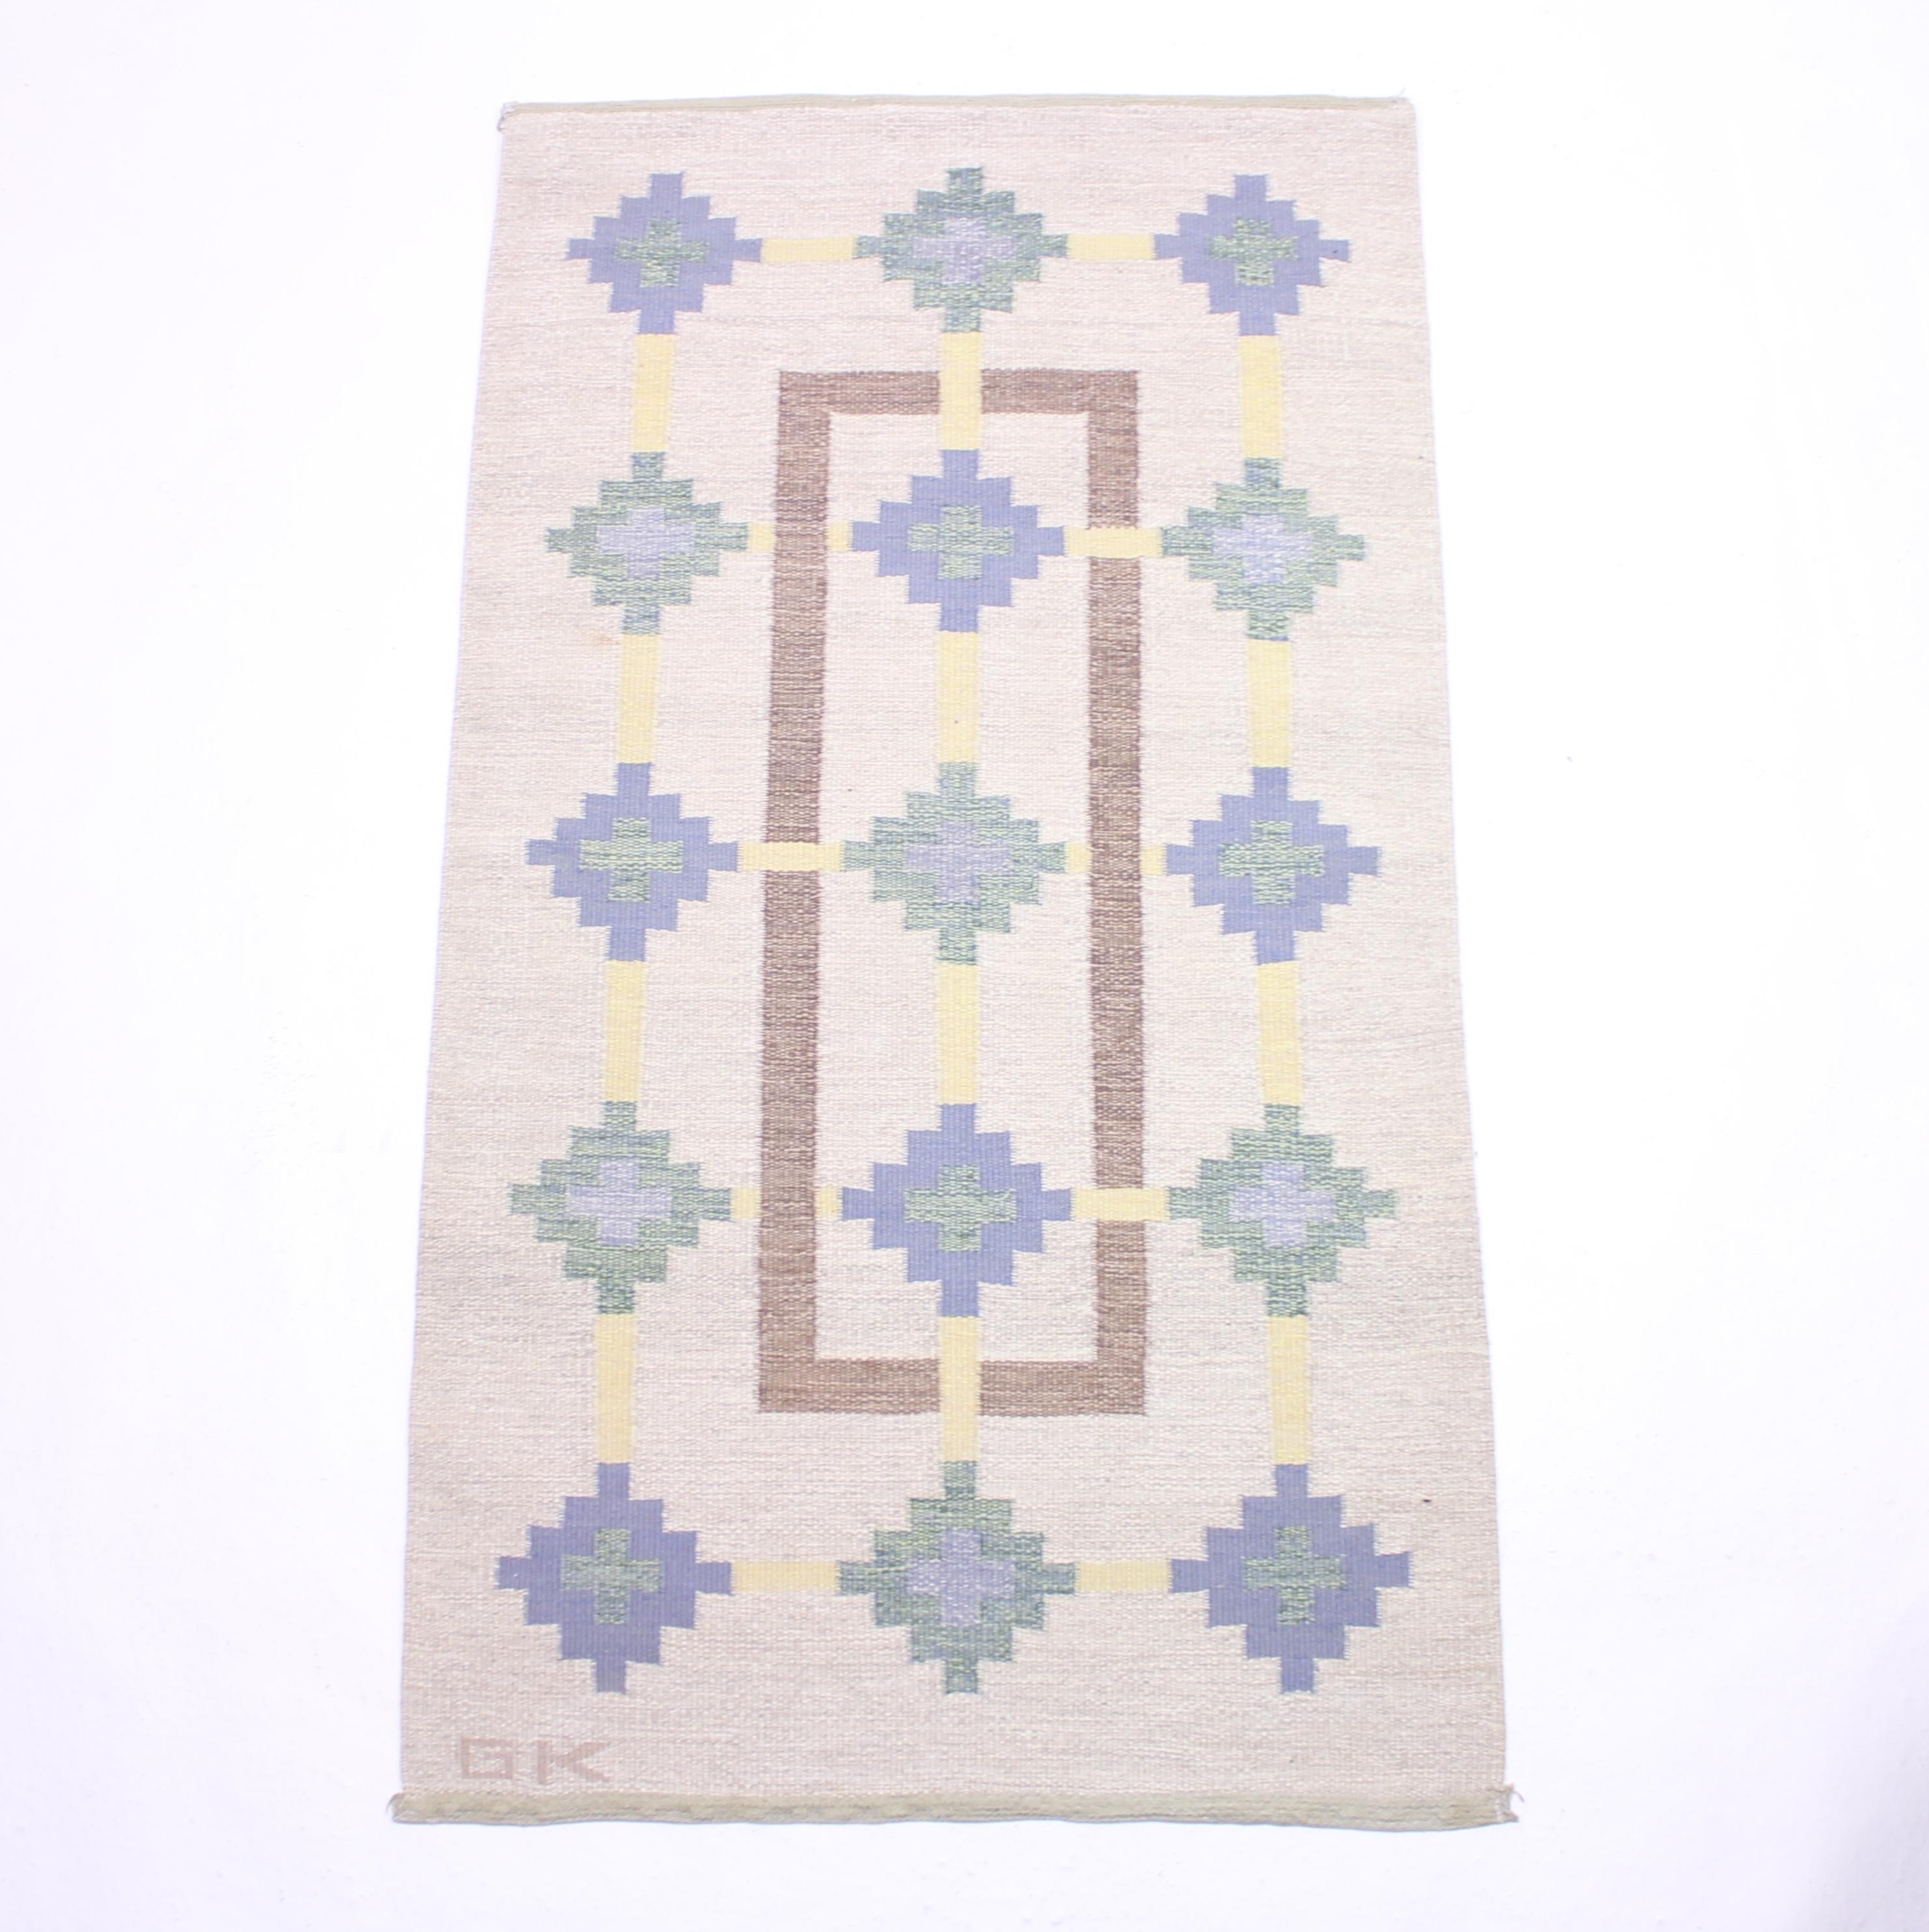 Swedish flat weave Röllakan carpet signed GK by unknown designer from the 1950s. Main colours are off-white with a dose of green, blue yellow and brown. Newly cleaned by a professional carpet cleaning company. Very good vintage condition with